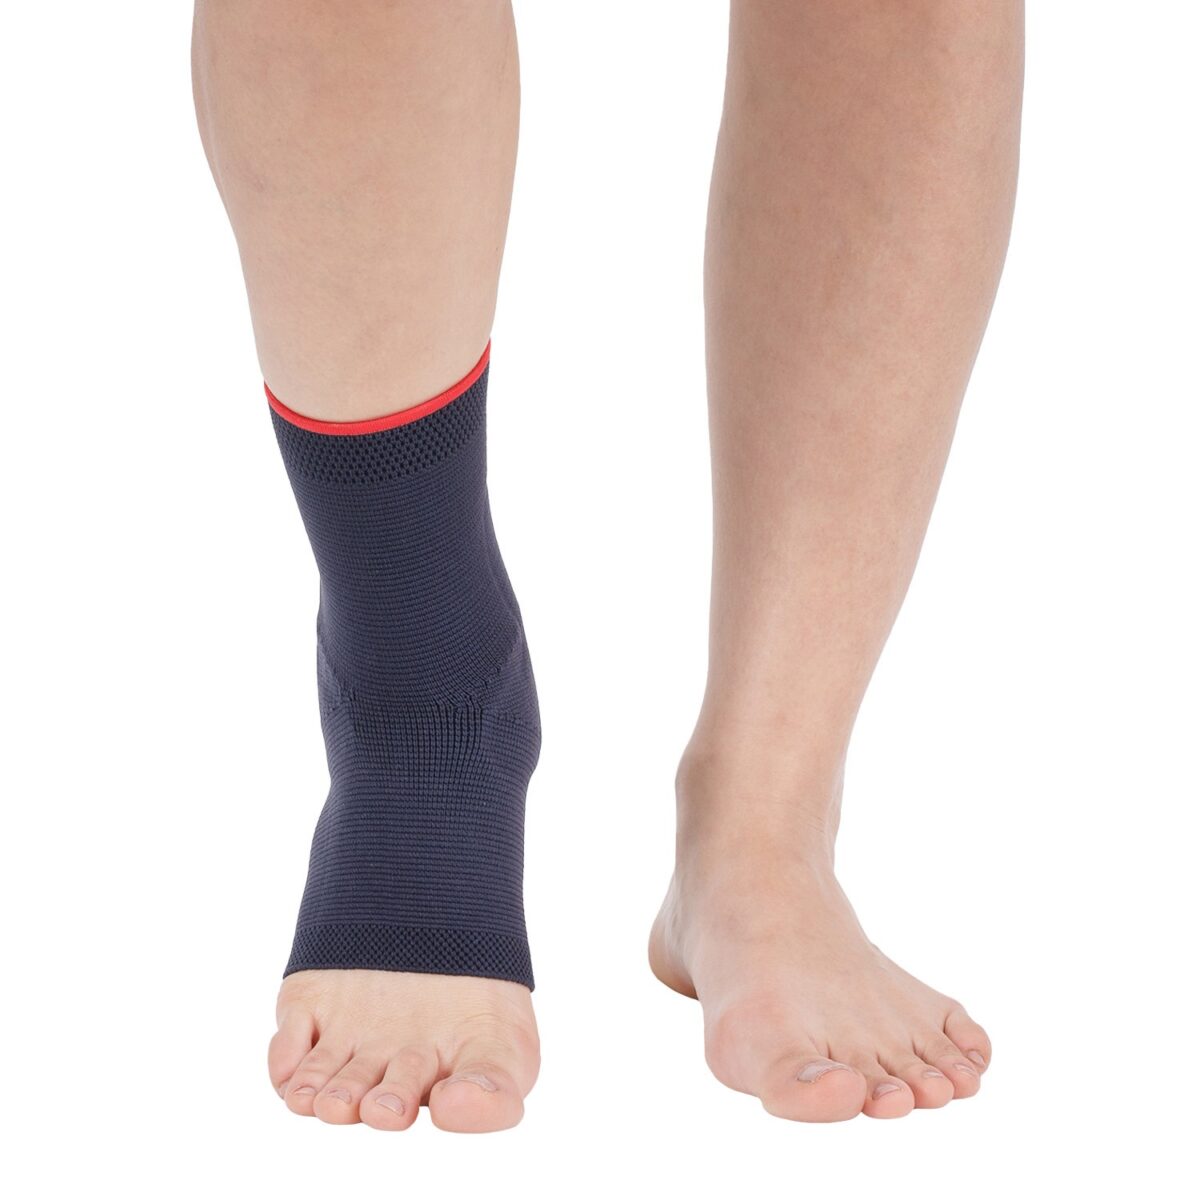 wingmed orthopedic equipments W604 woven malleol ankle support 13 2